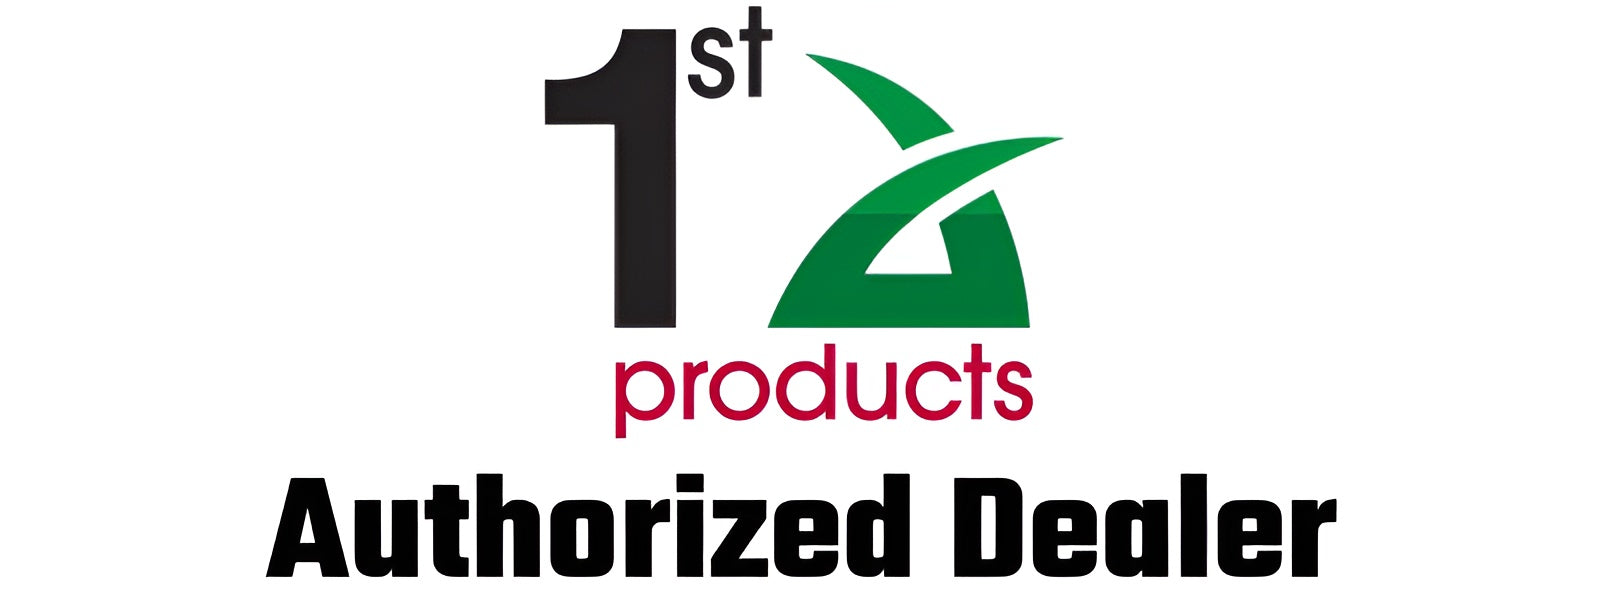 1st Products Authorized Dealer Badge